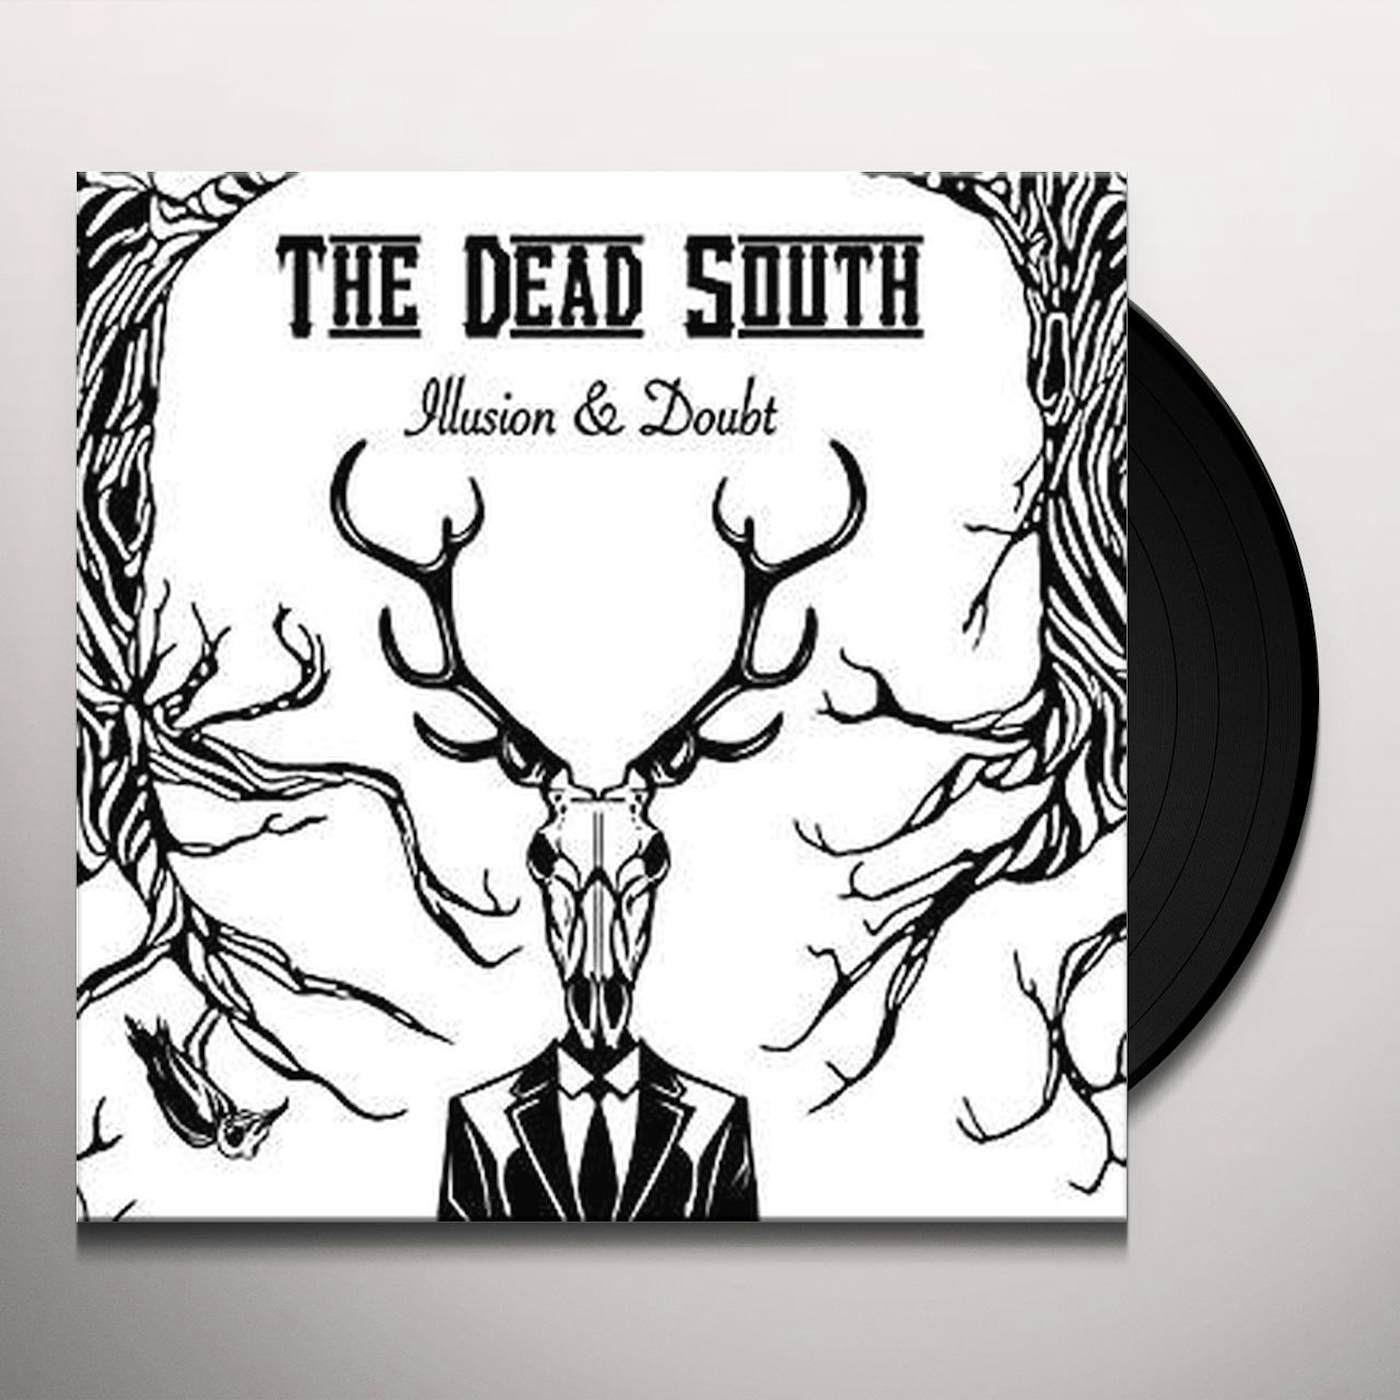 The Dead South Illusion & Doubt Vinyl Record